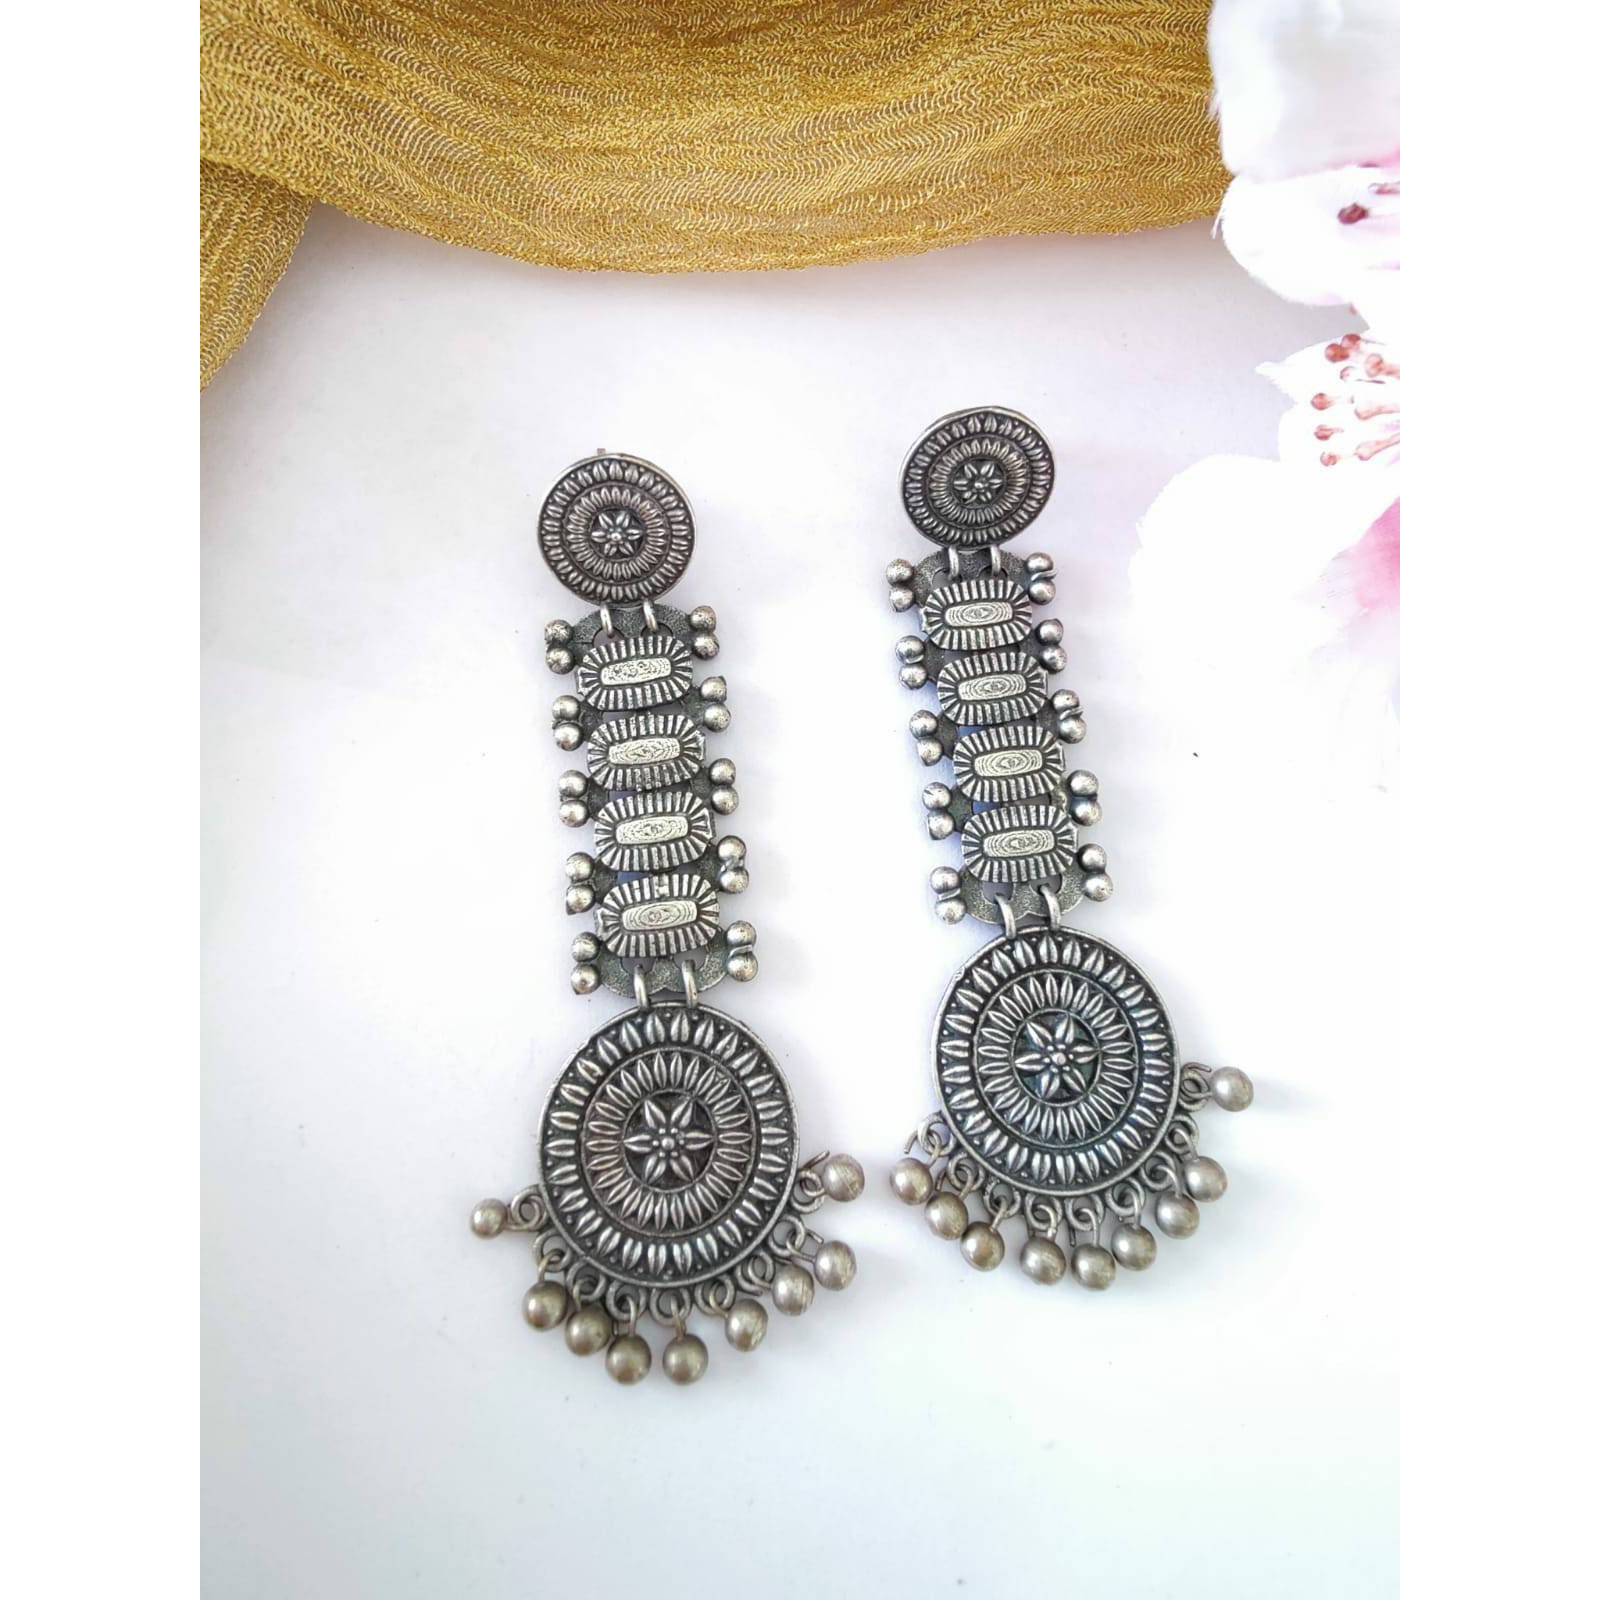 This is a beautiful pair of zircon stud earrings. The pack comes with one pair of beautiful studded oxidized earrings. You can choose from any of the two options provided. This pair will work with any Indian or western outfit. Buy this for yourself or get it as a gift for your loved ones. Besides, you will also get an assured gift on every purchase.